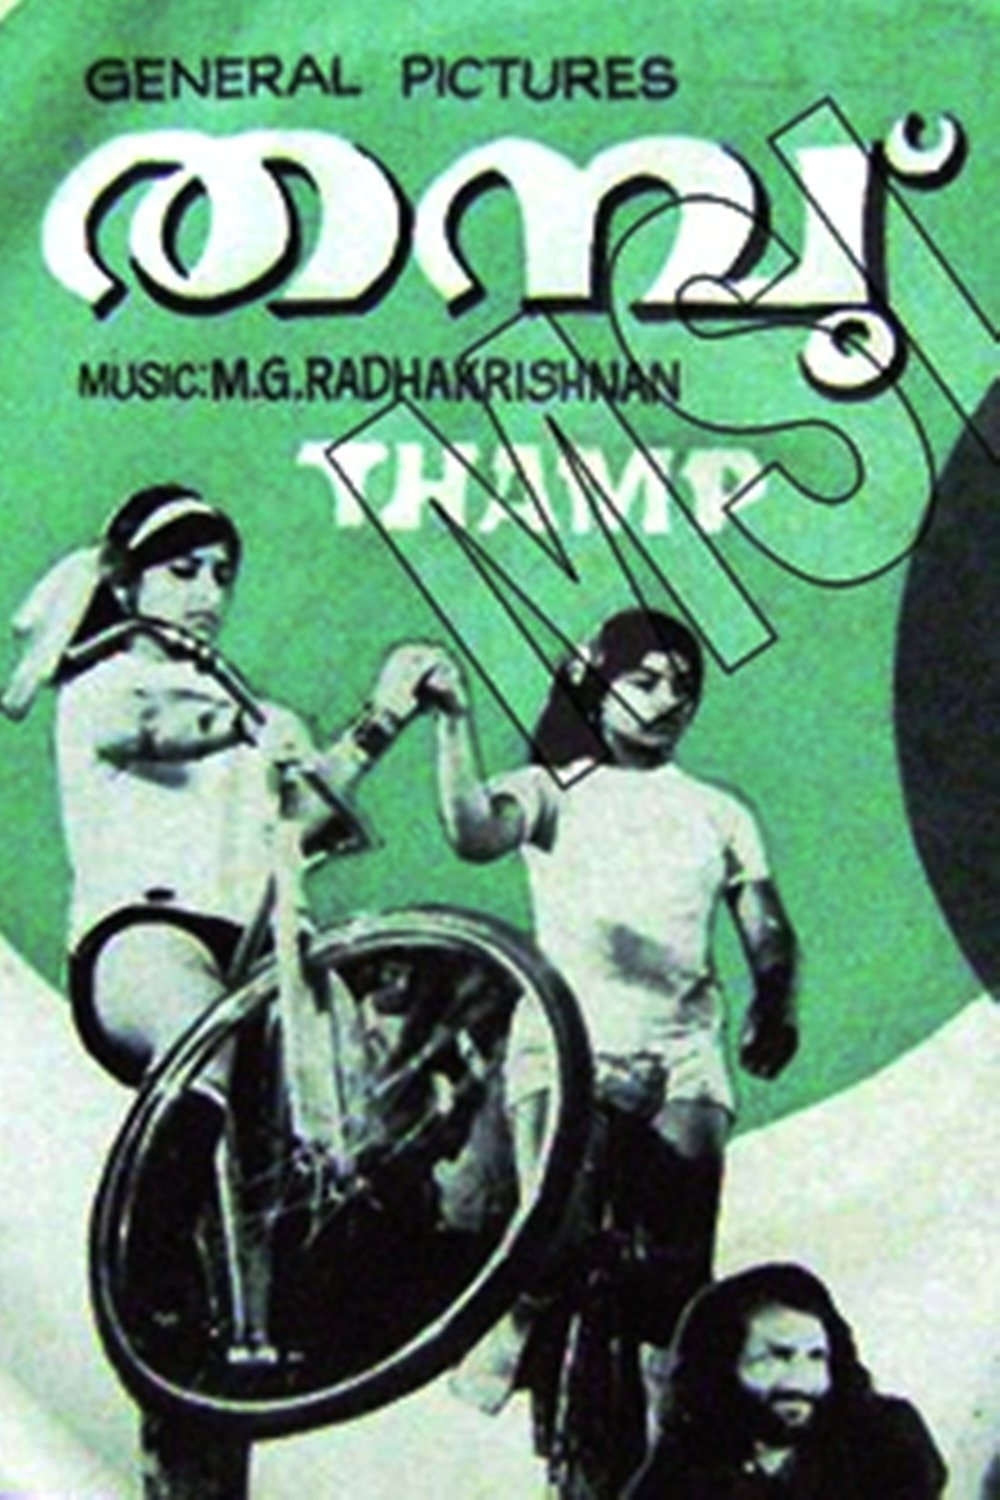 Malayalam poster of the movie The Circus Tent